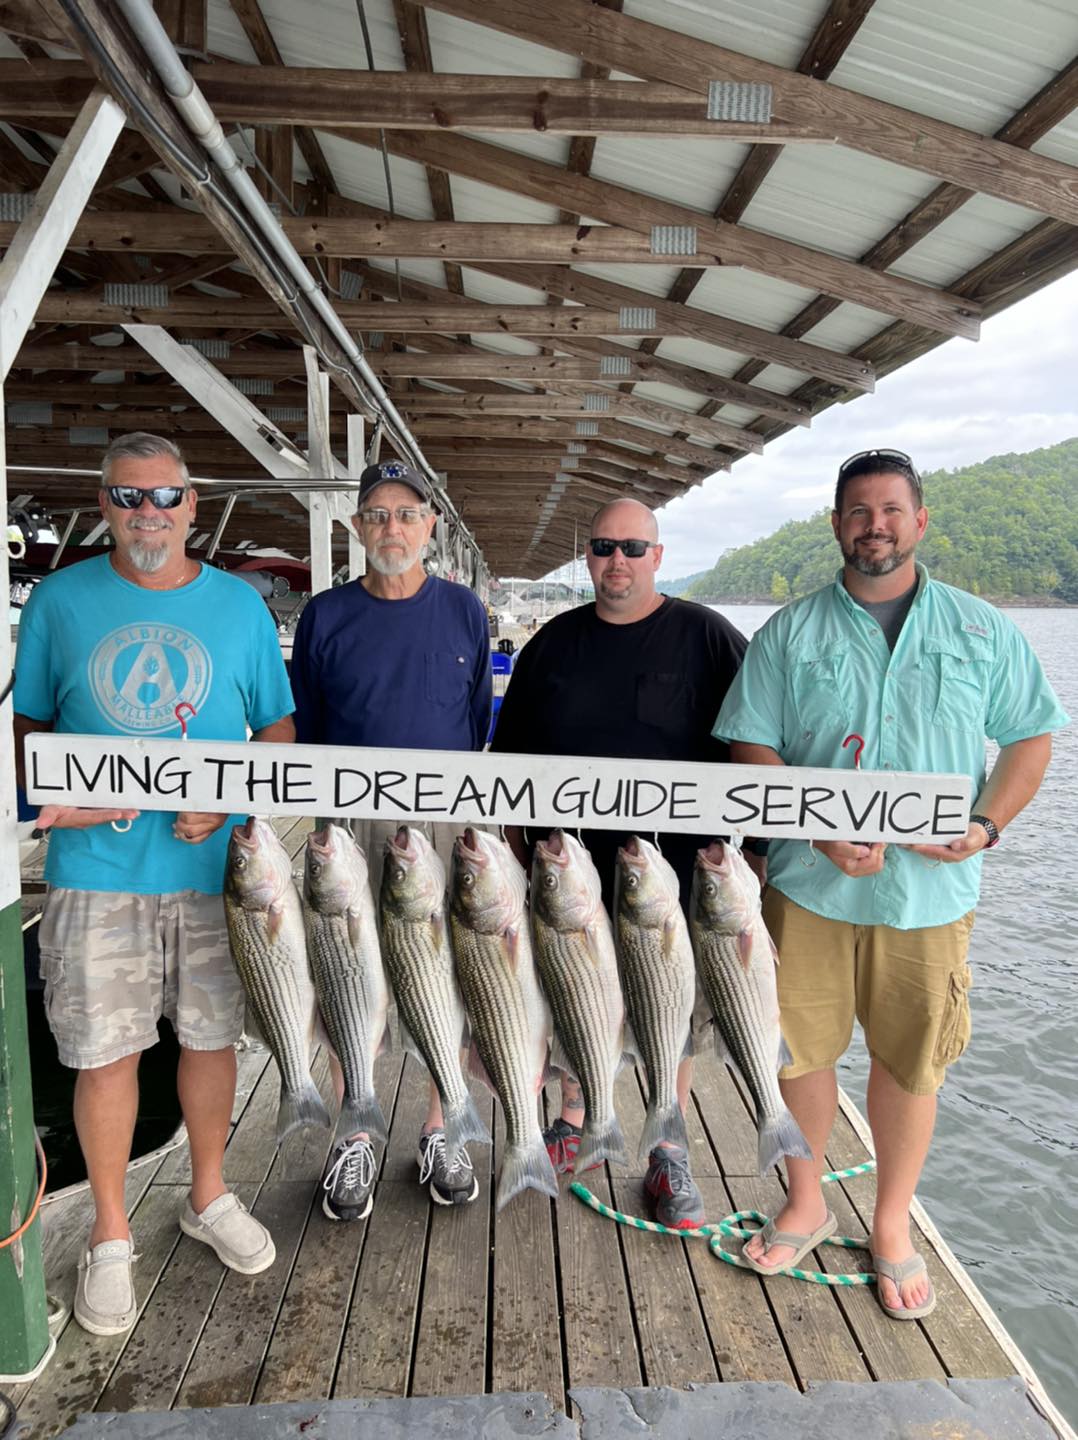 Four men holding onto a board that says Living the Dream Guide Service, has seven striper fish hanging below.